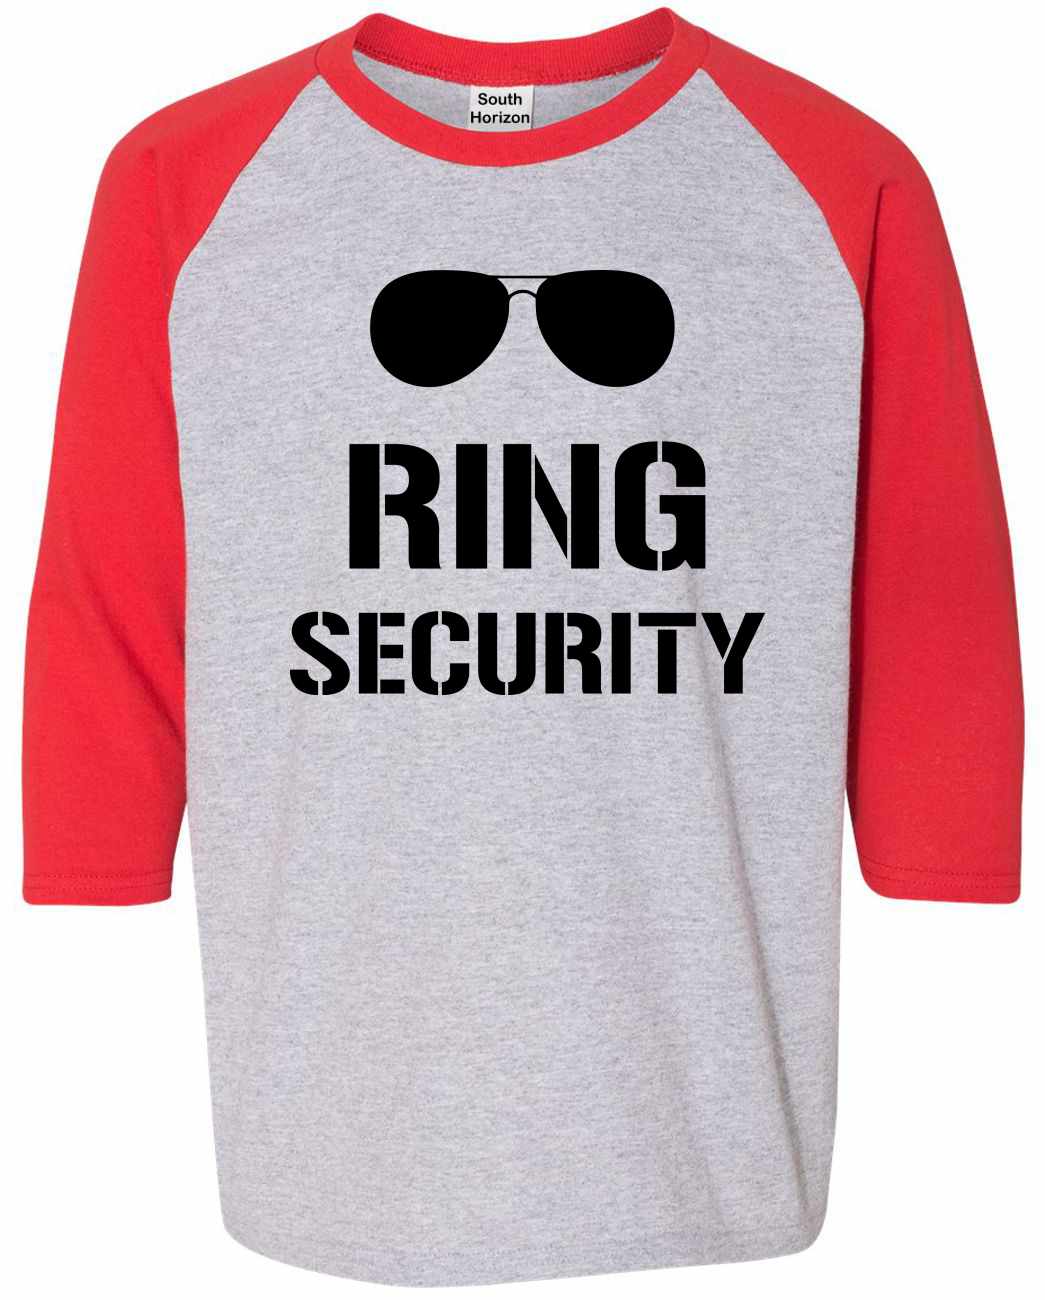 Ring Security on Youth Baseball Shirt (#1011-212)